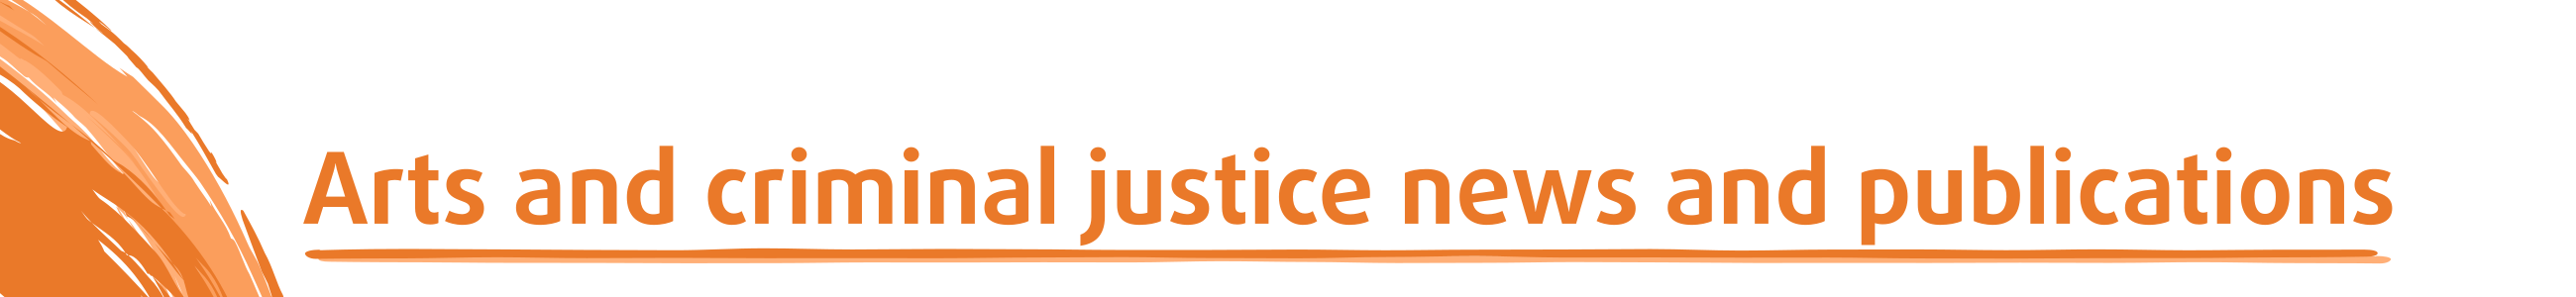 Arts in criminal justice news and publications